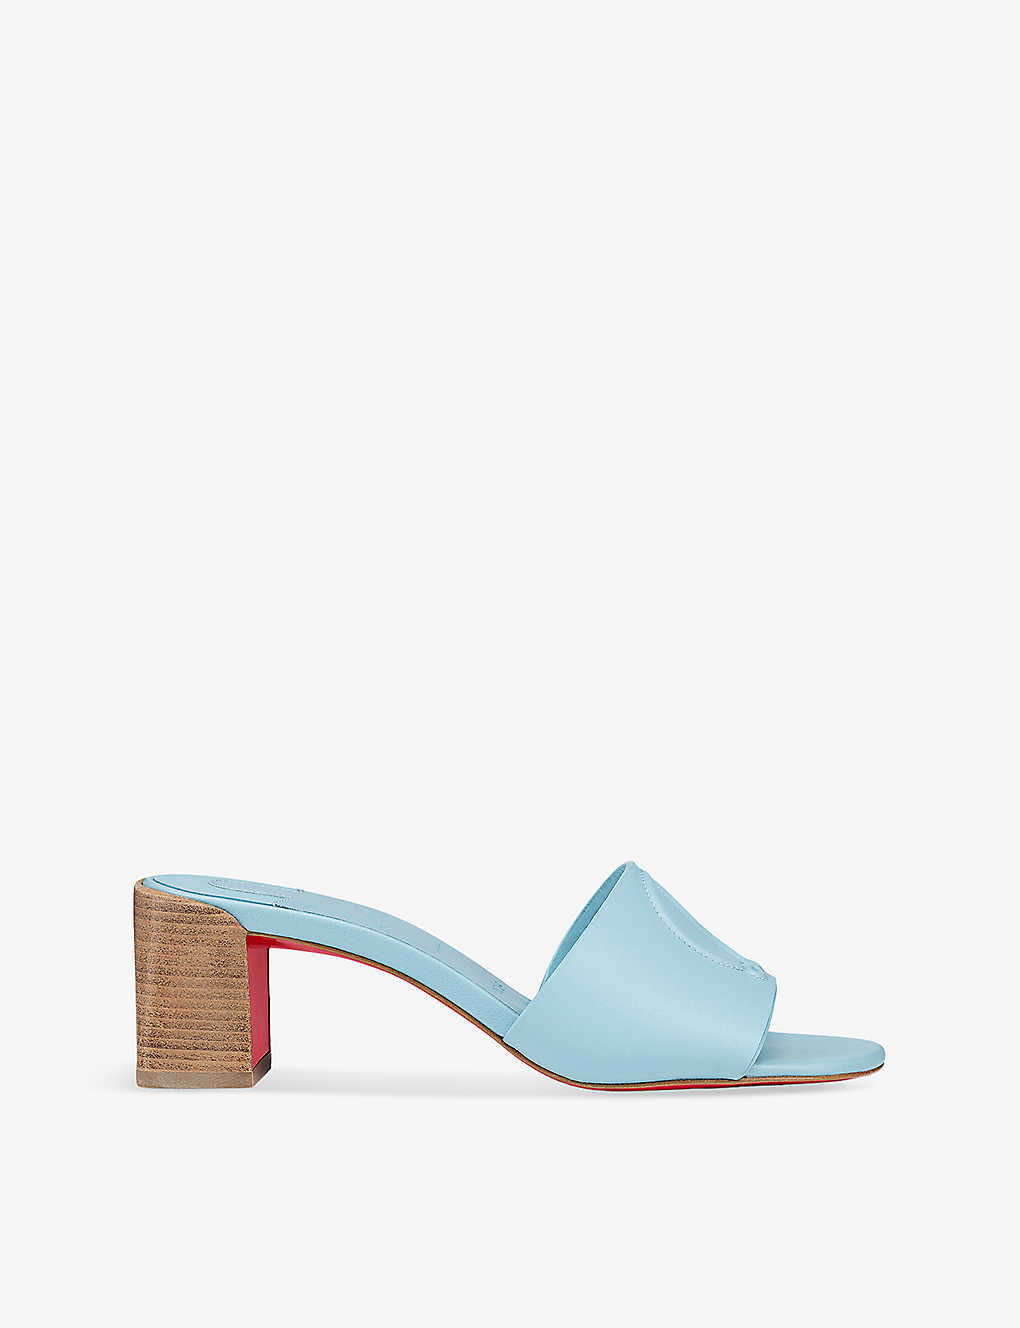 Shop Christian Louboutin Women's Mineral So Cl 55 Leather Heeled Mules